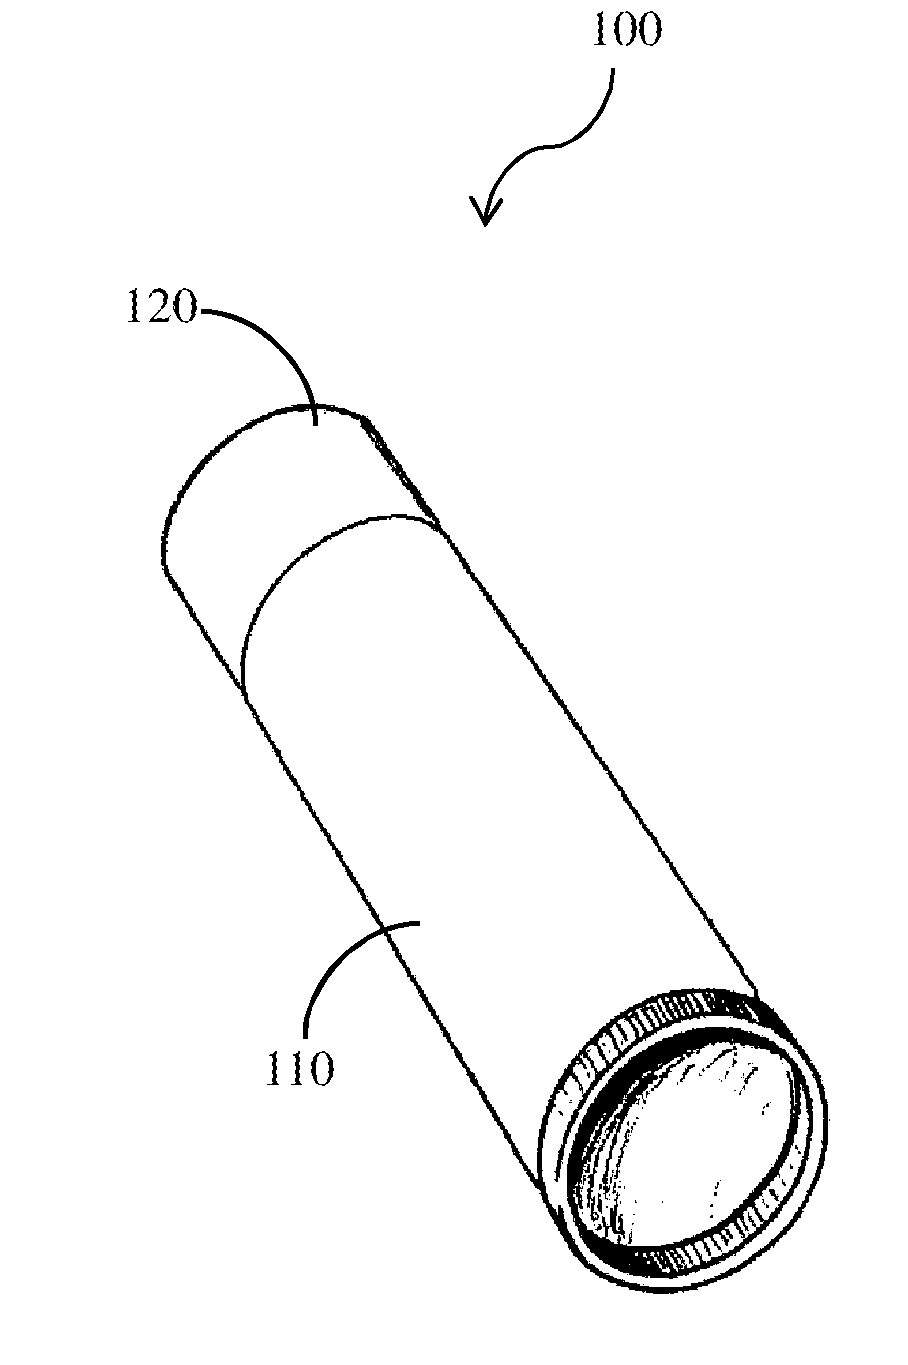 Methods for coating implant surfaces to treat surgical infections